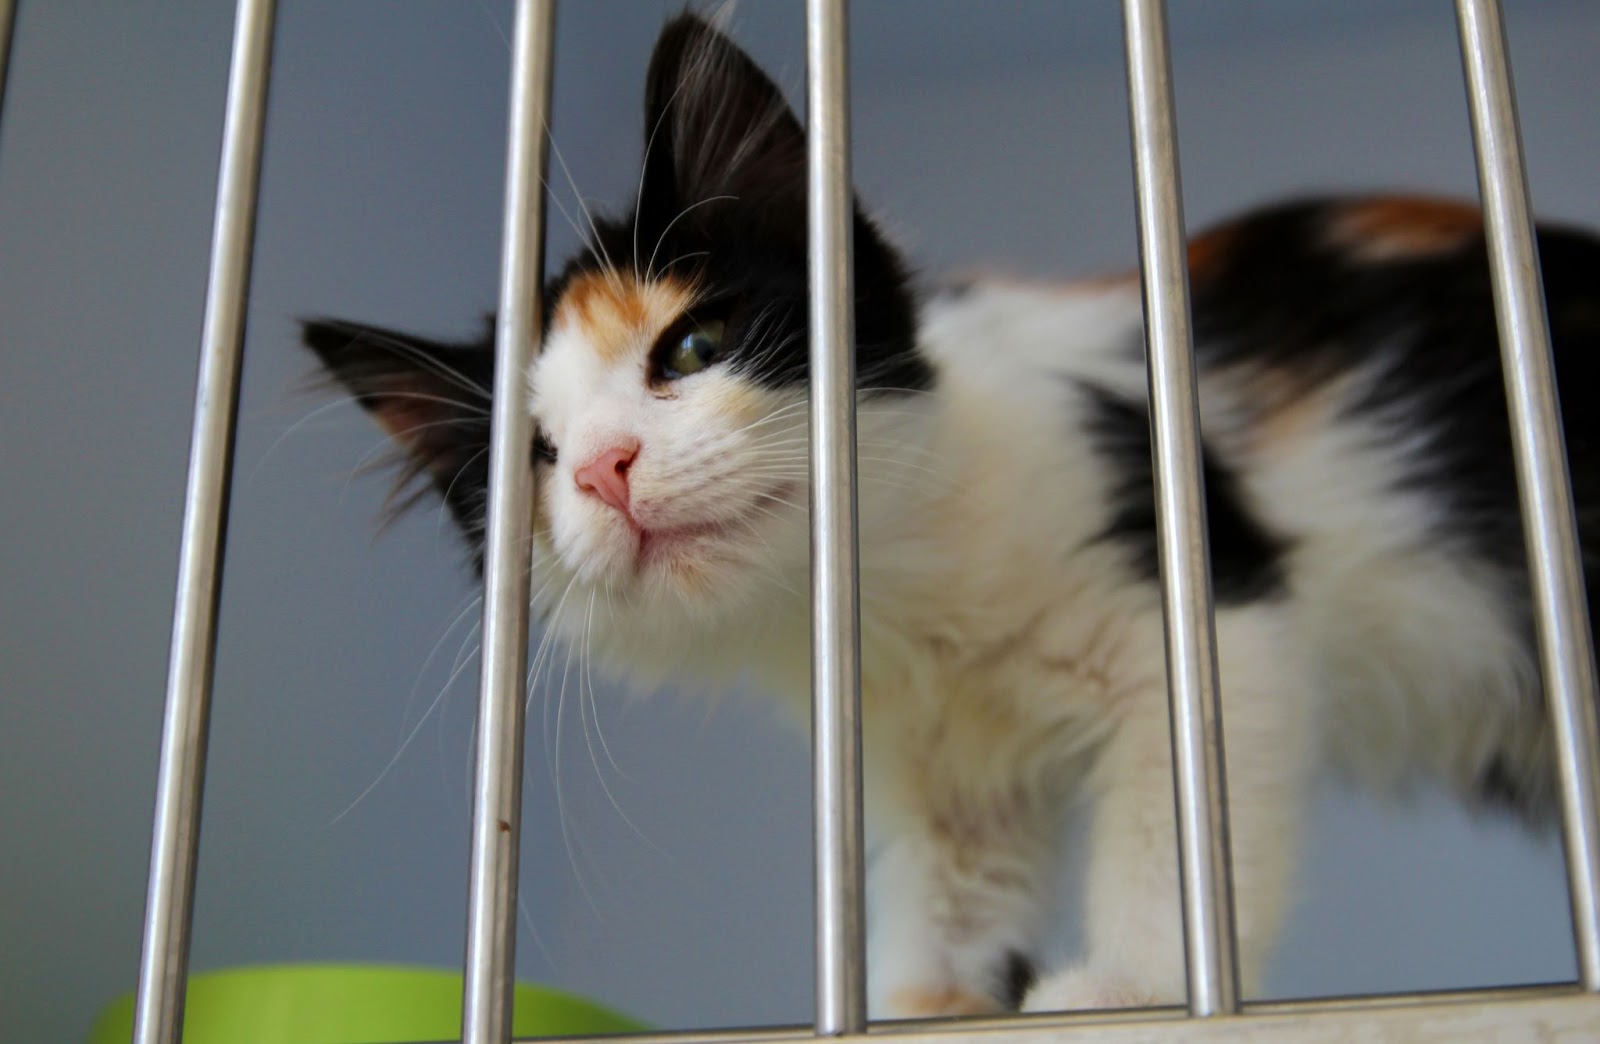 Adopt a stray cat from a shelter